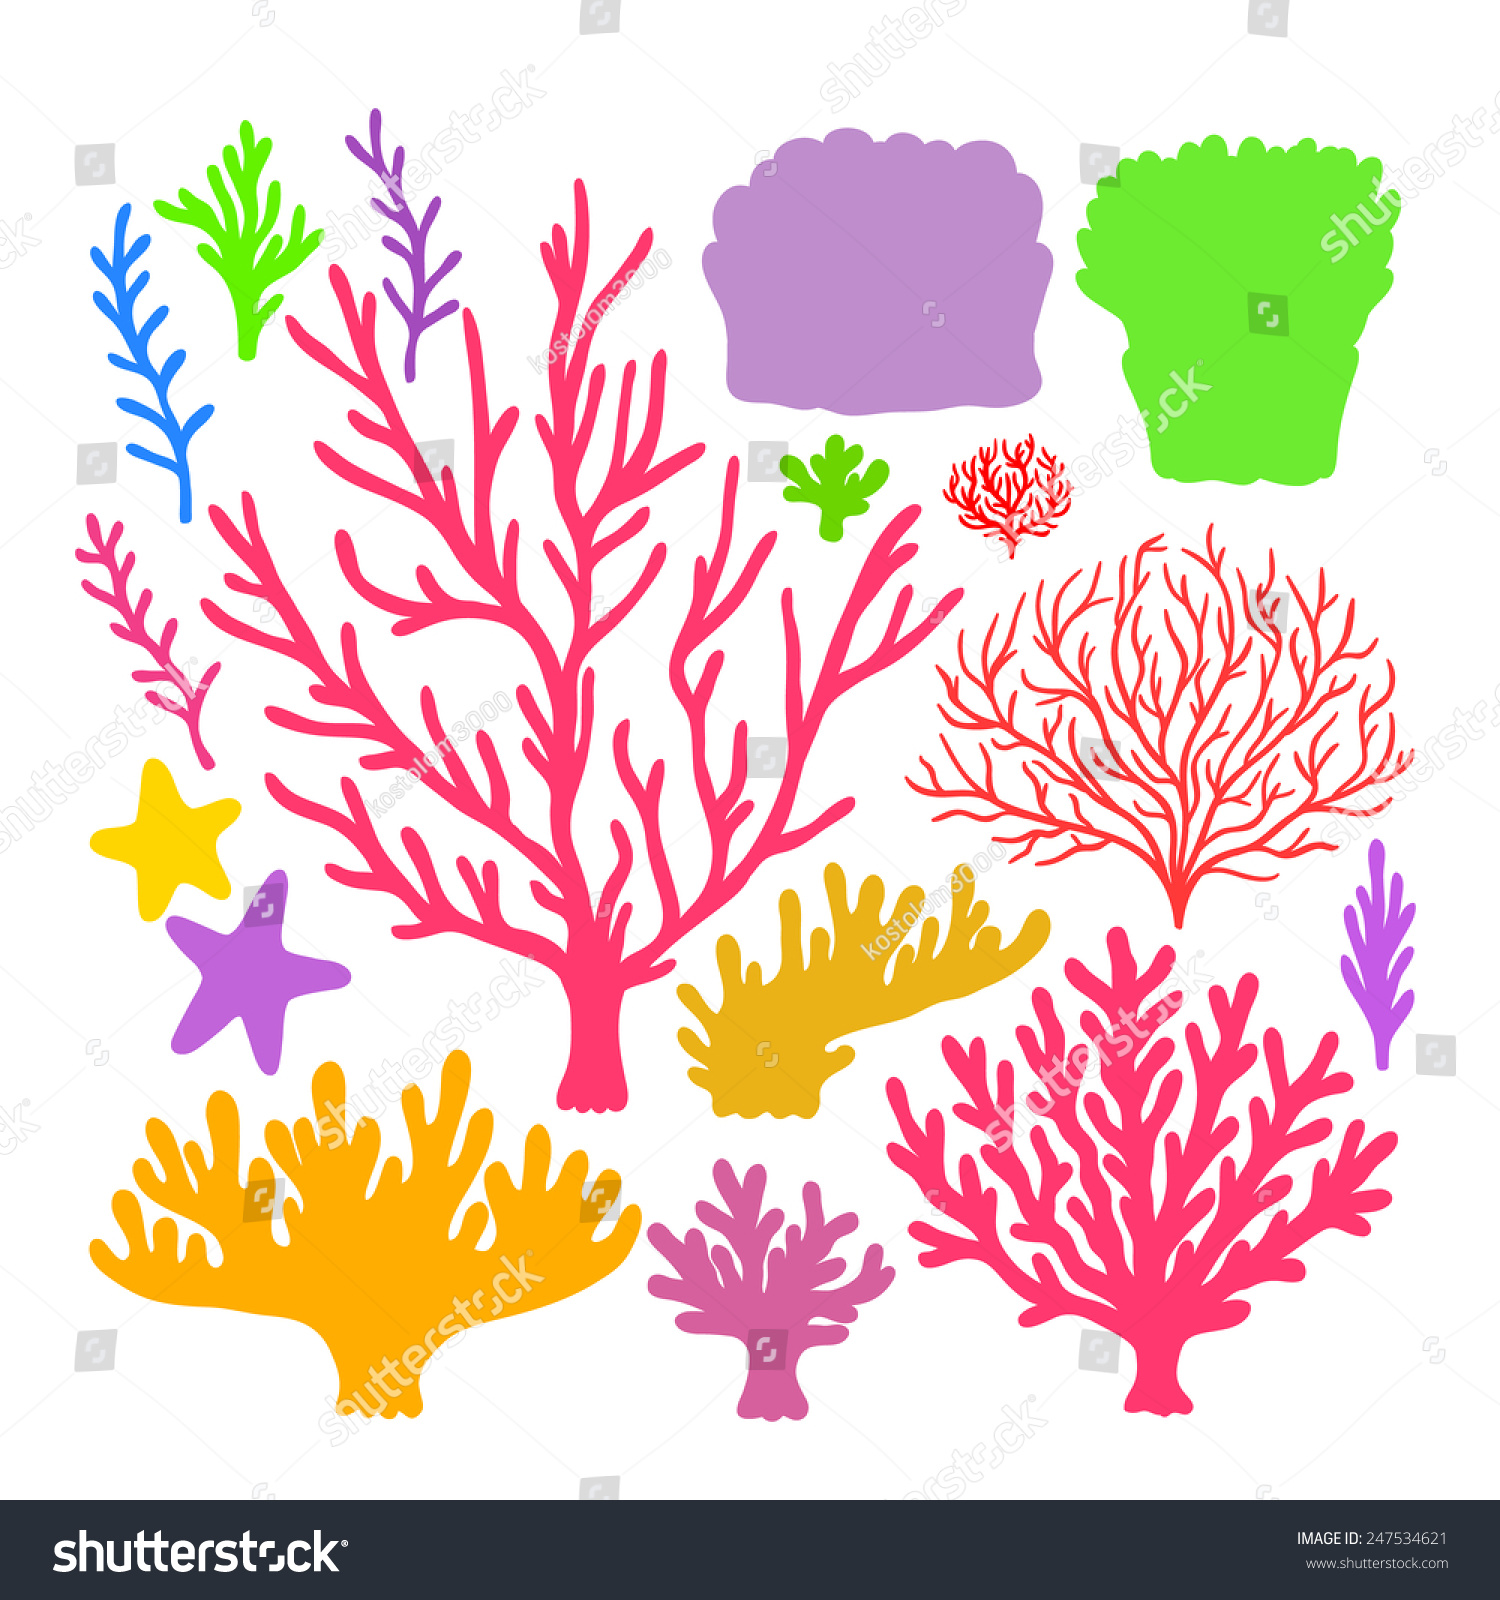 Set Of Hand Drawn Vector Colorful Underwater Coral Reef Design Elements ...